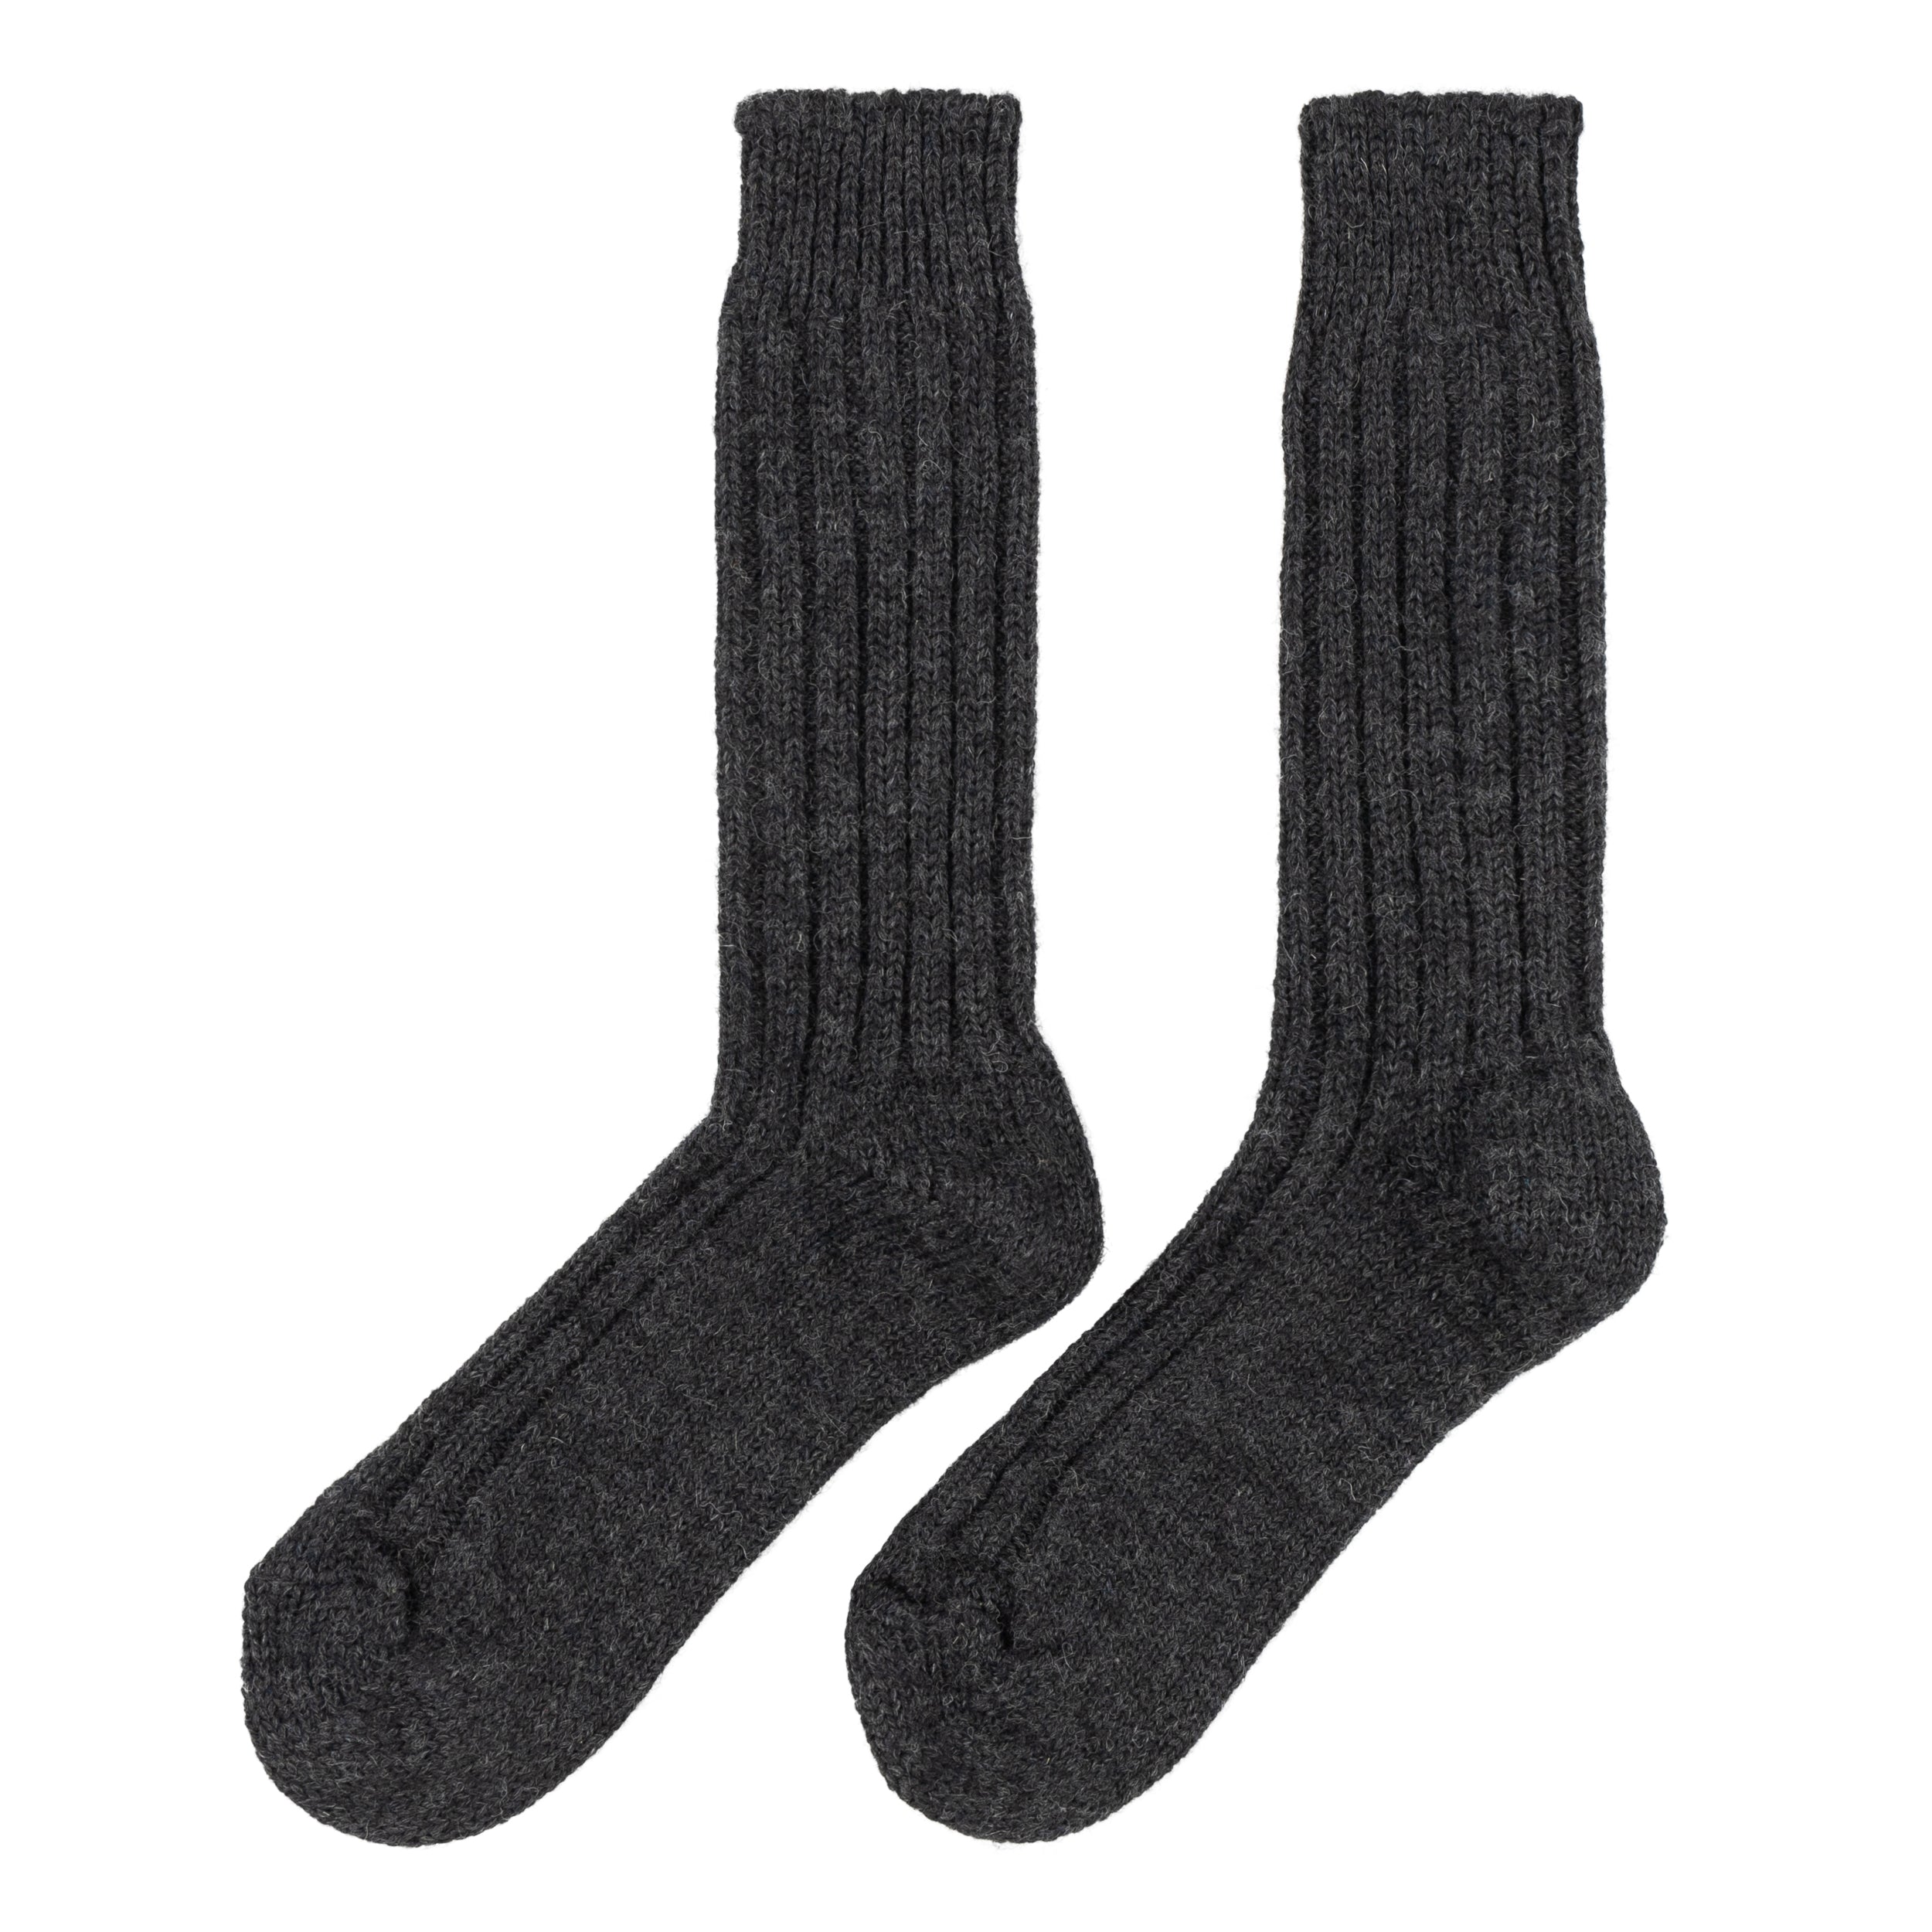 Carrier Company Wool Sock in Charcoal